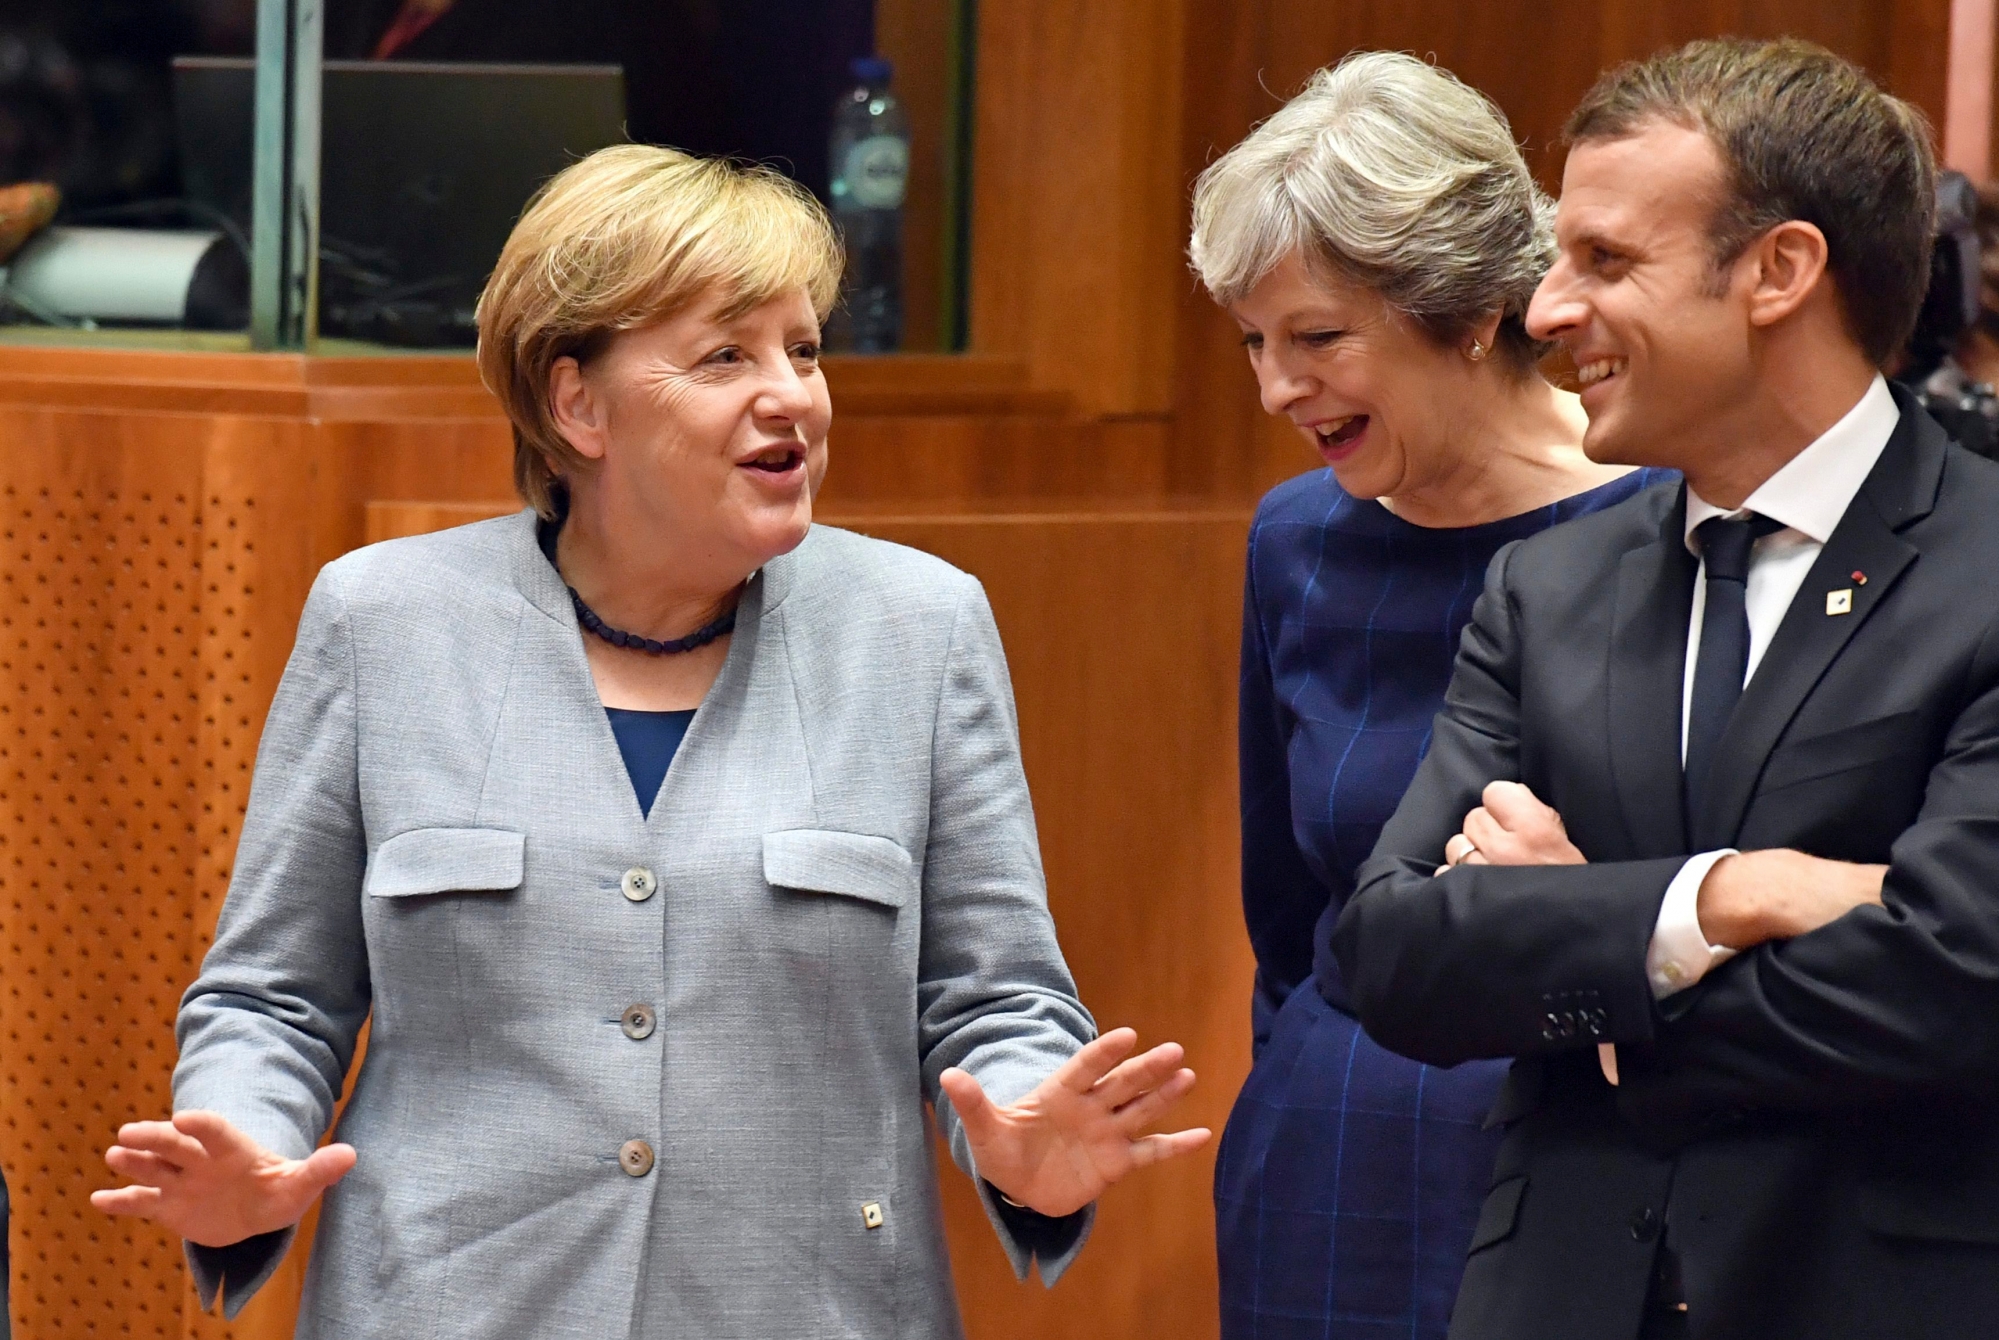 German Chancellor Angela Merkel, left, speaks with British Prime Minister Theresa May, center, and French President Emmanuel Macron prior to a round table meeting at an EU summit in Brussels on Thursday, Oct. 19, 2017. British Prime Minister Theresa May headed to a European Union summit Thursday with a pledge to treat EU residents well once Britain leaves the bloc. (AP Photo/Geert Vanden Wijngaert) Belgium EU Brexit